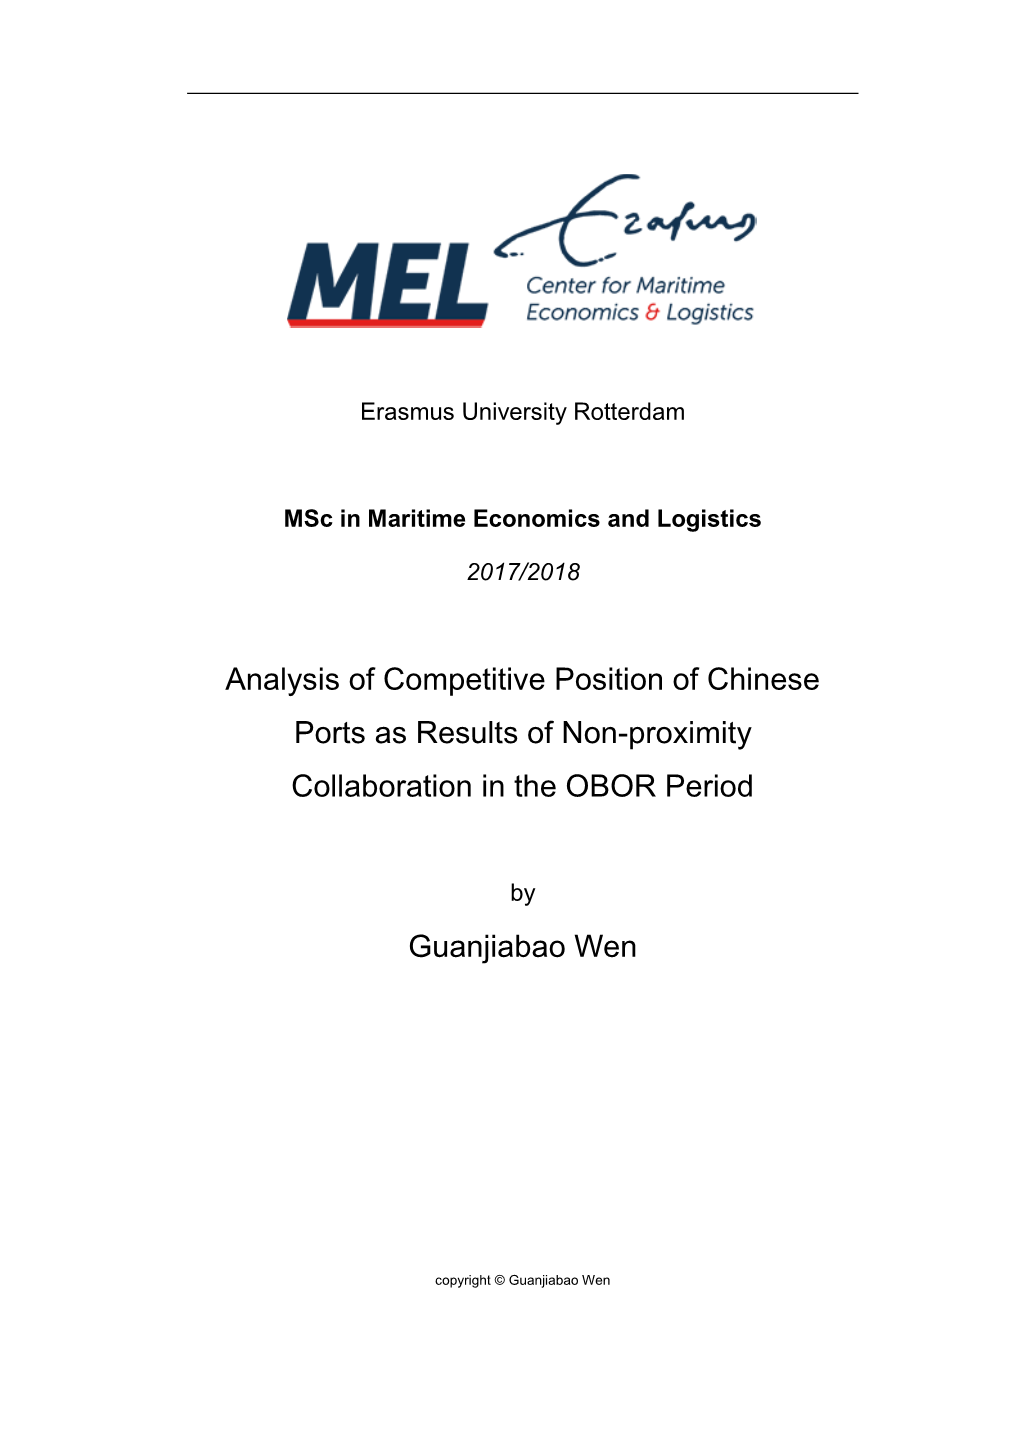 Analysis of Competitive Position of Chinese Ports As Results of Non-Proximity Collaboration in the OBOR Period